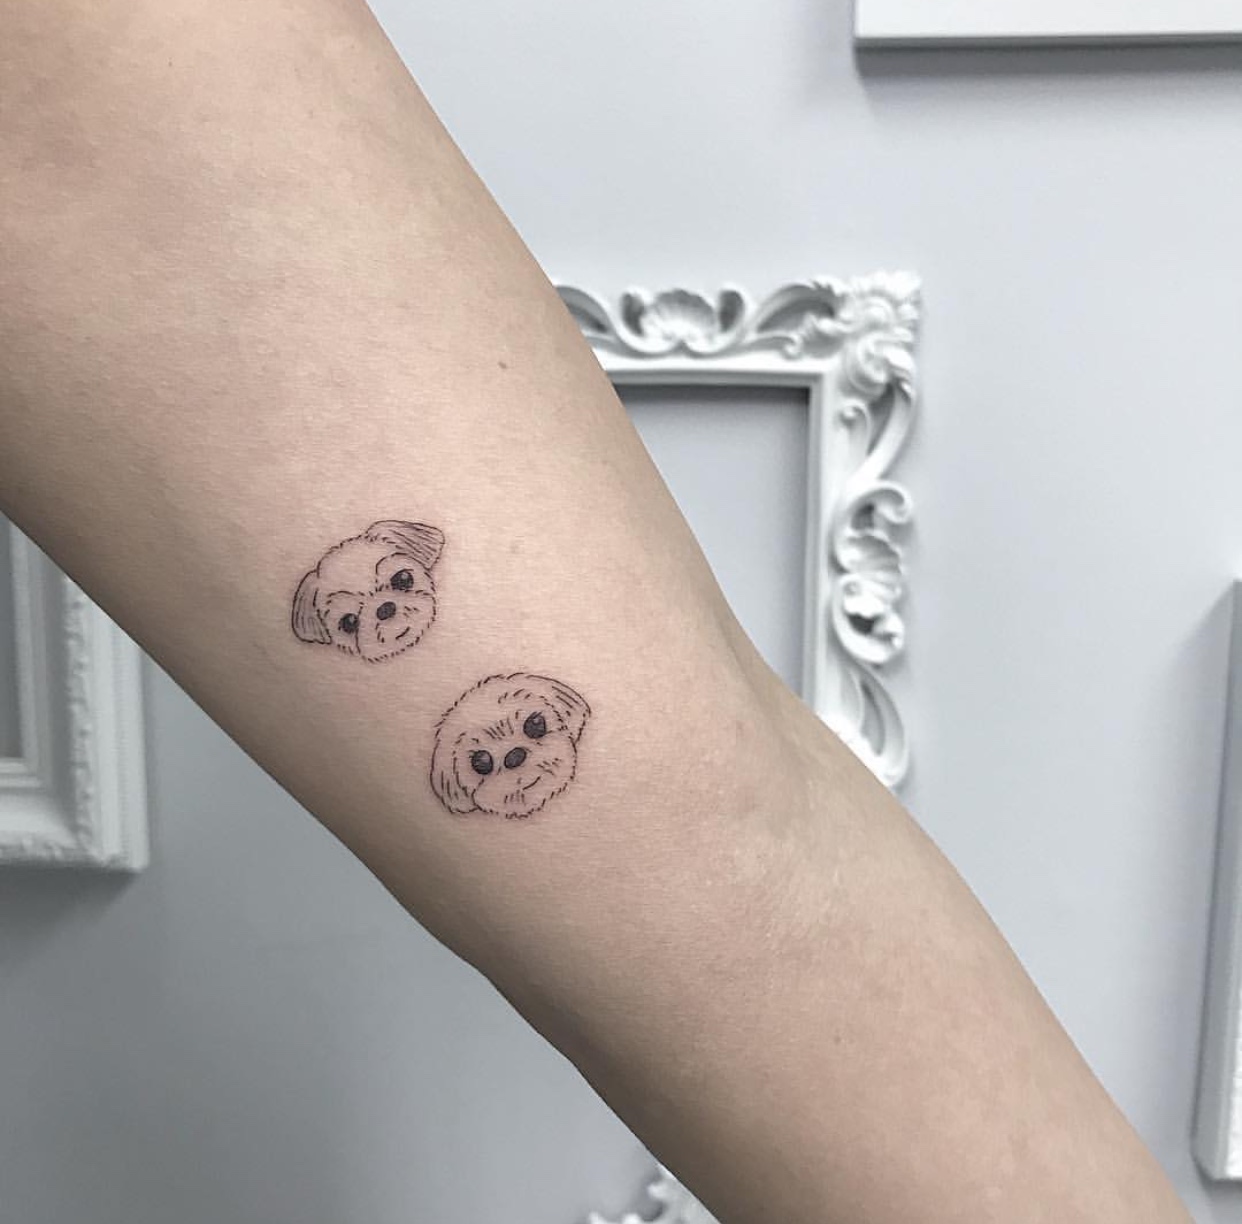 two faces of Shih Tzus tattoo on the arm